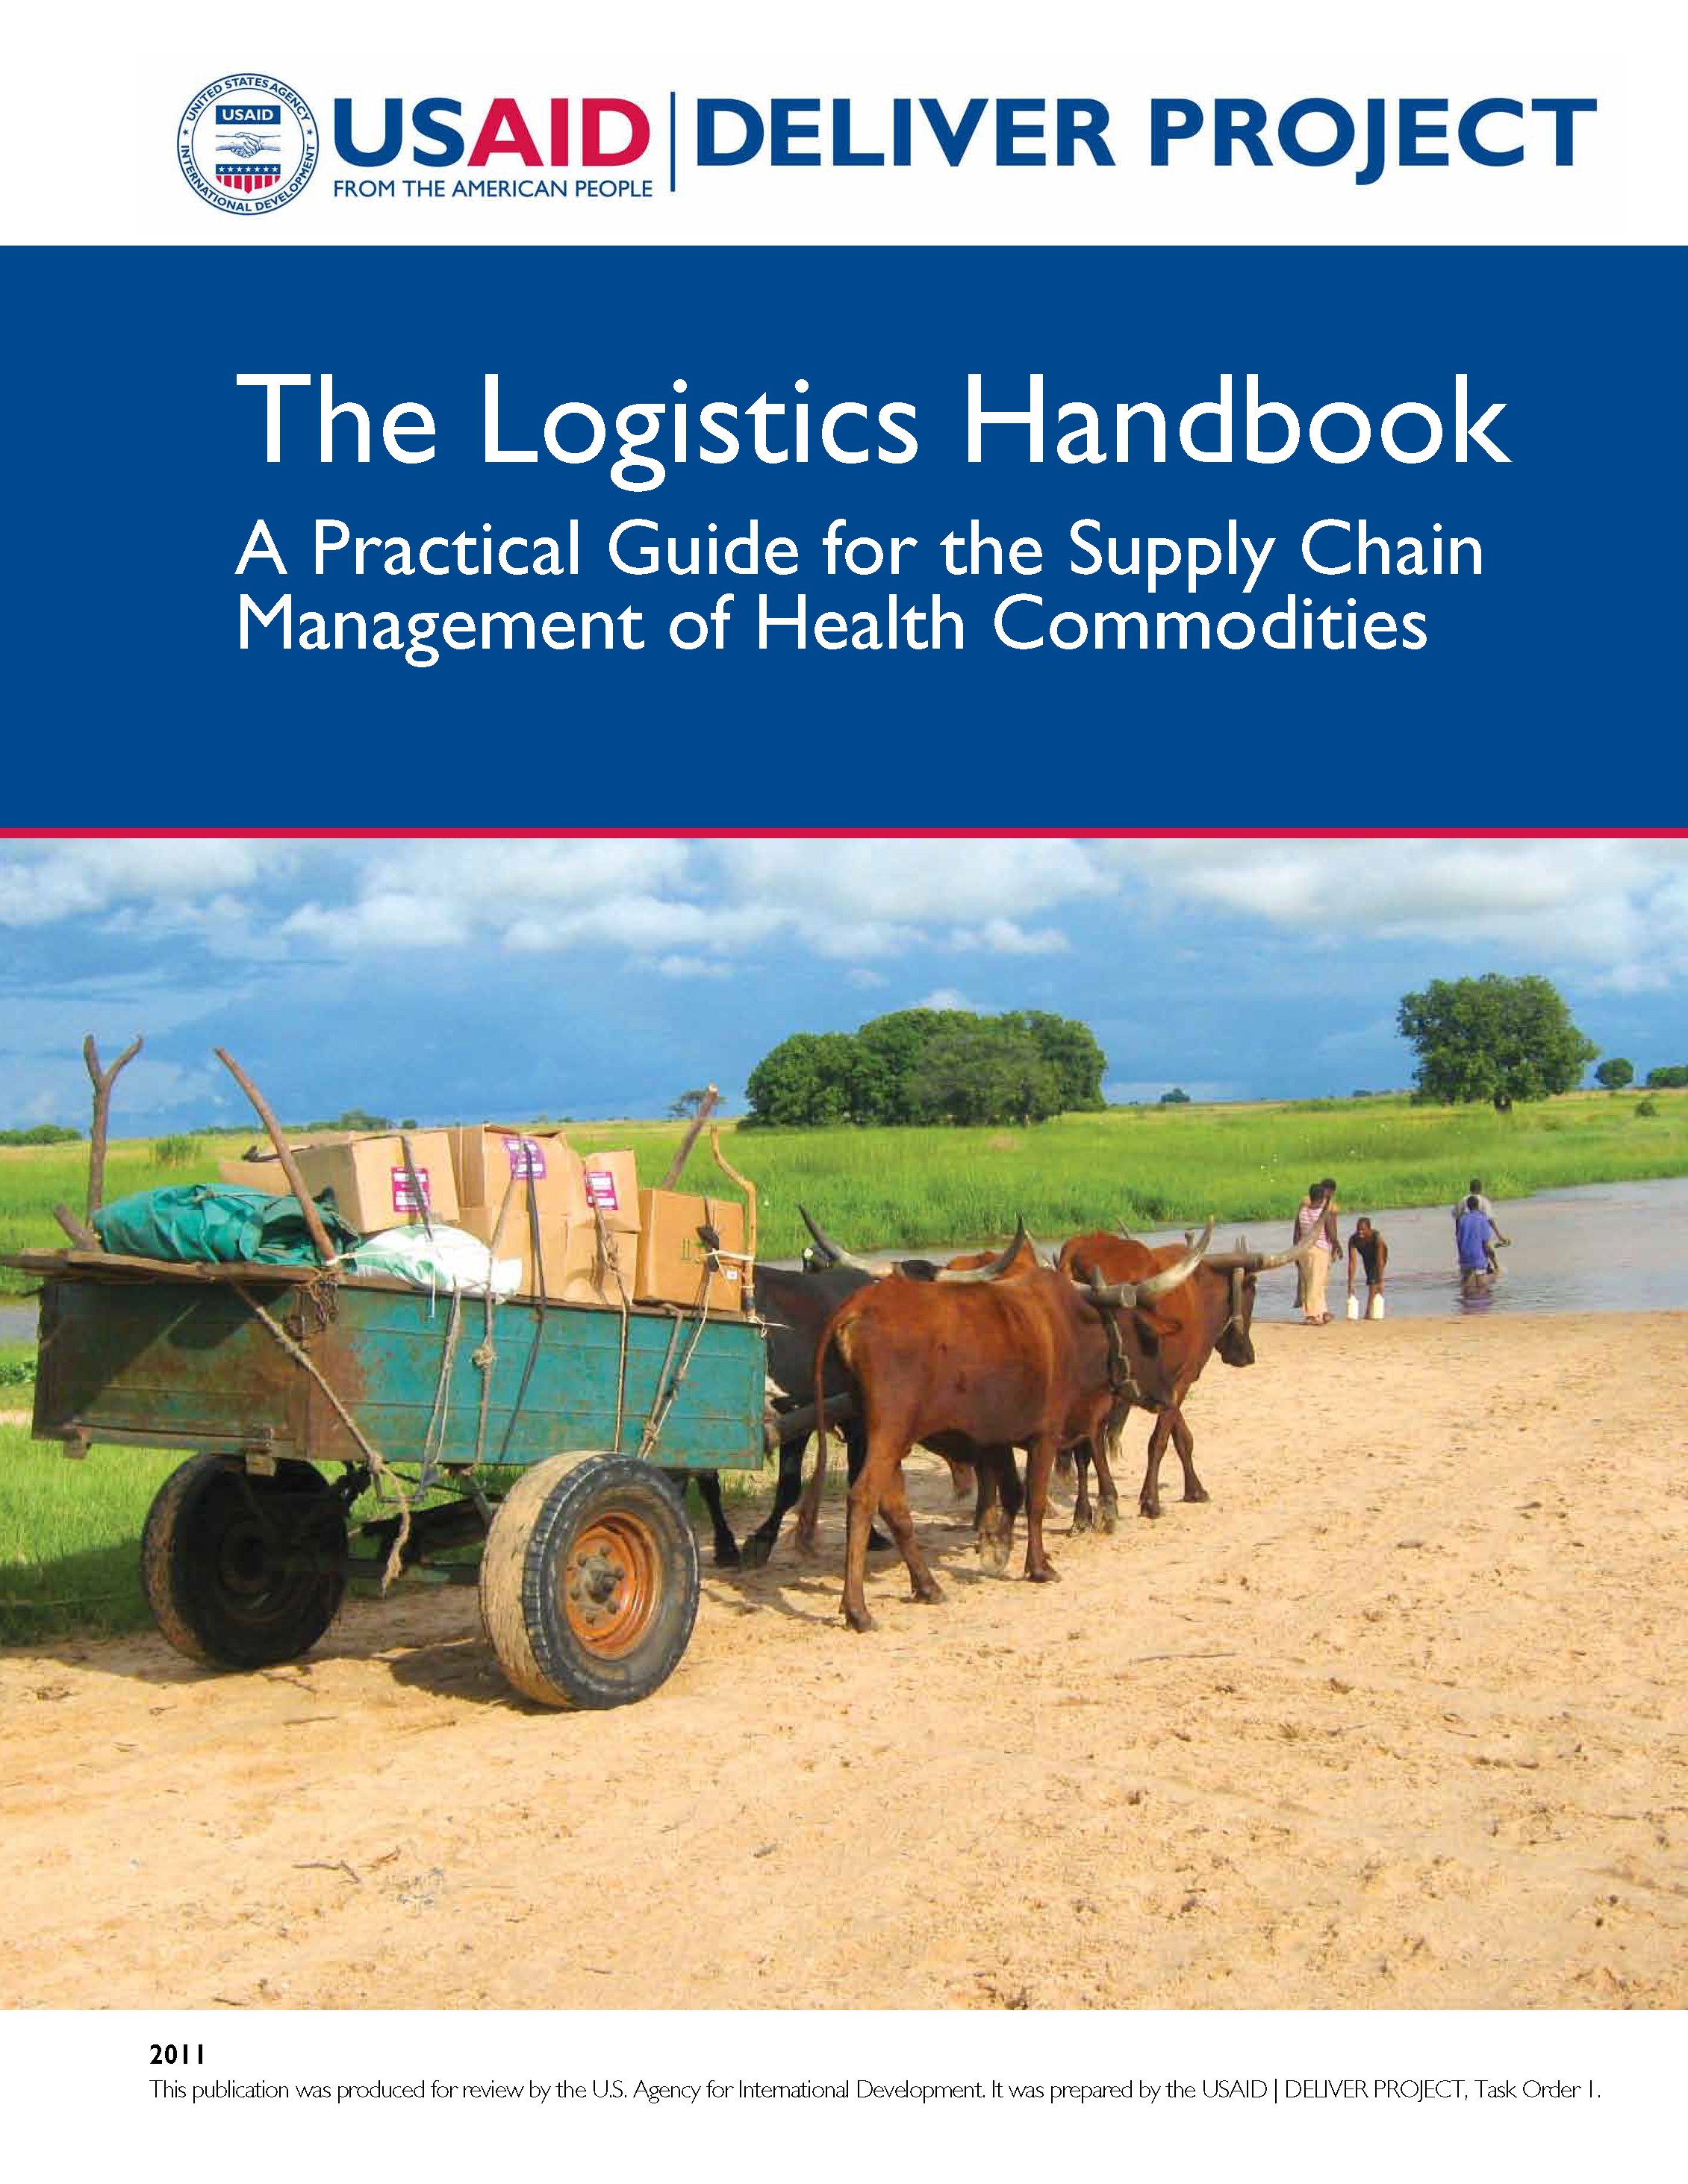 Cover for Practical Guide for the Supply Chain Management of Health Commodities